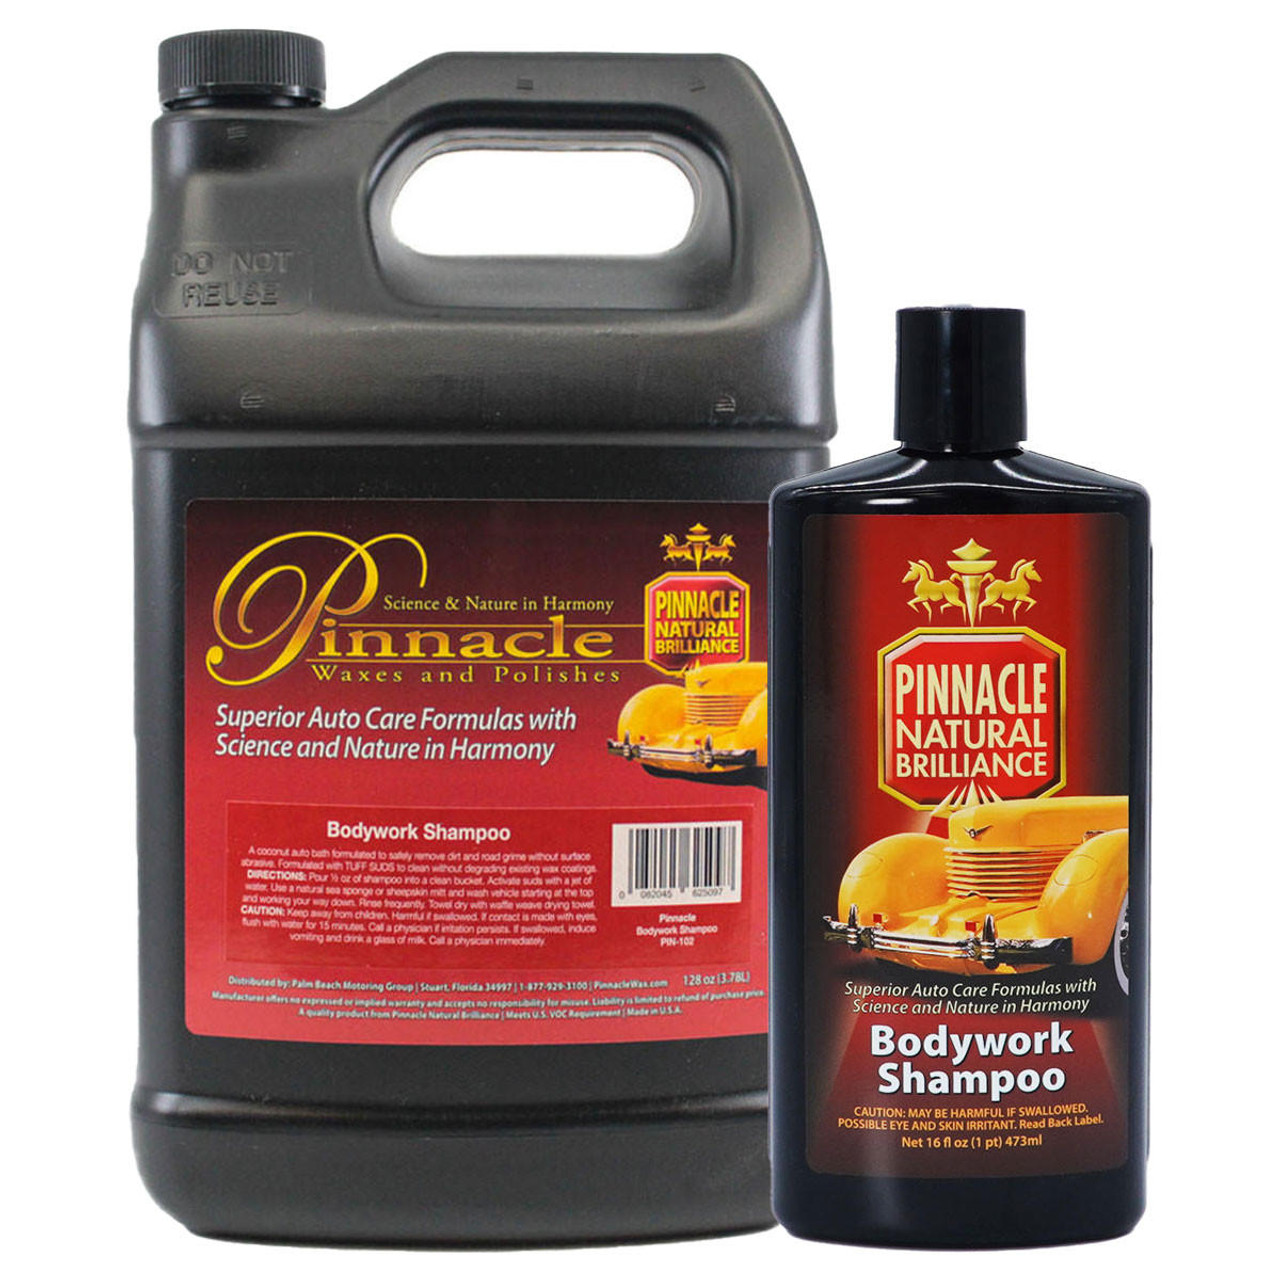 Pinnacle Leather Cleaner & Conditioner 16oz